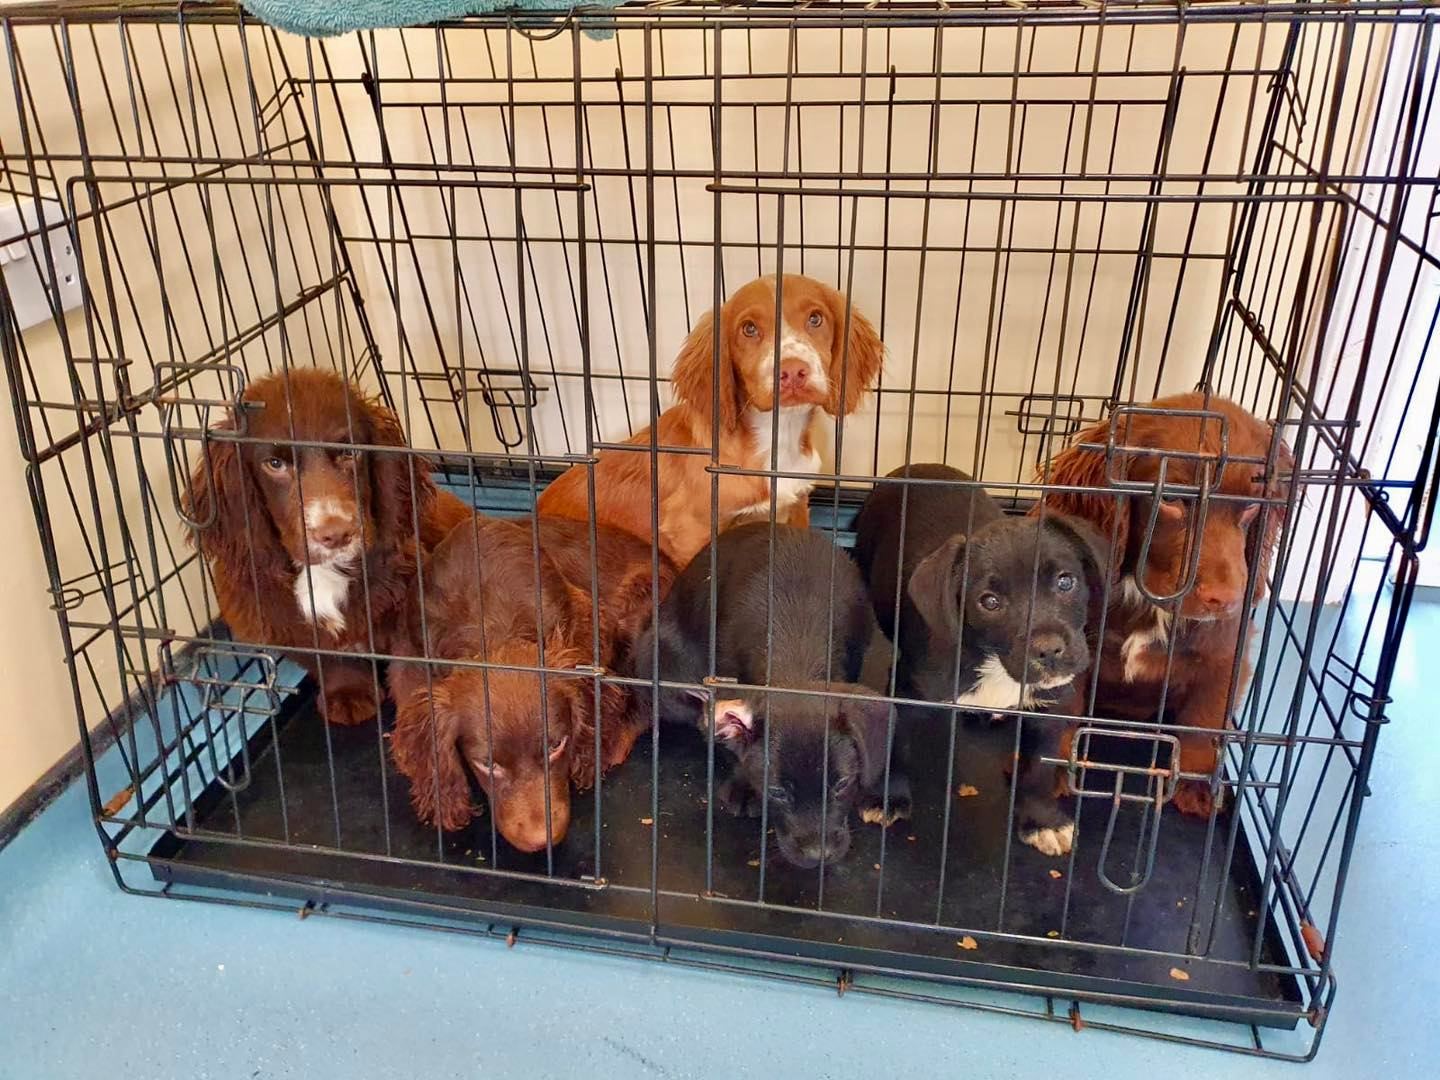 The four cocker spaniels and two terrier crossbreeds puppies found dumped in a metal cage.